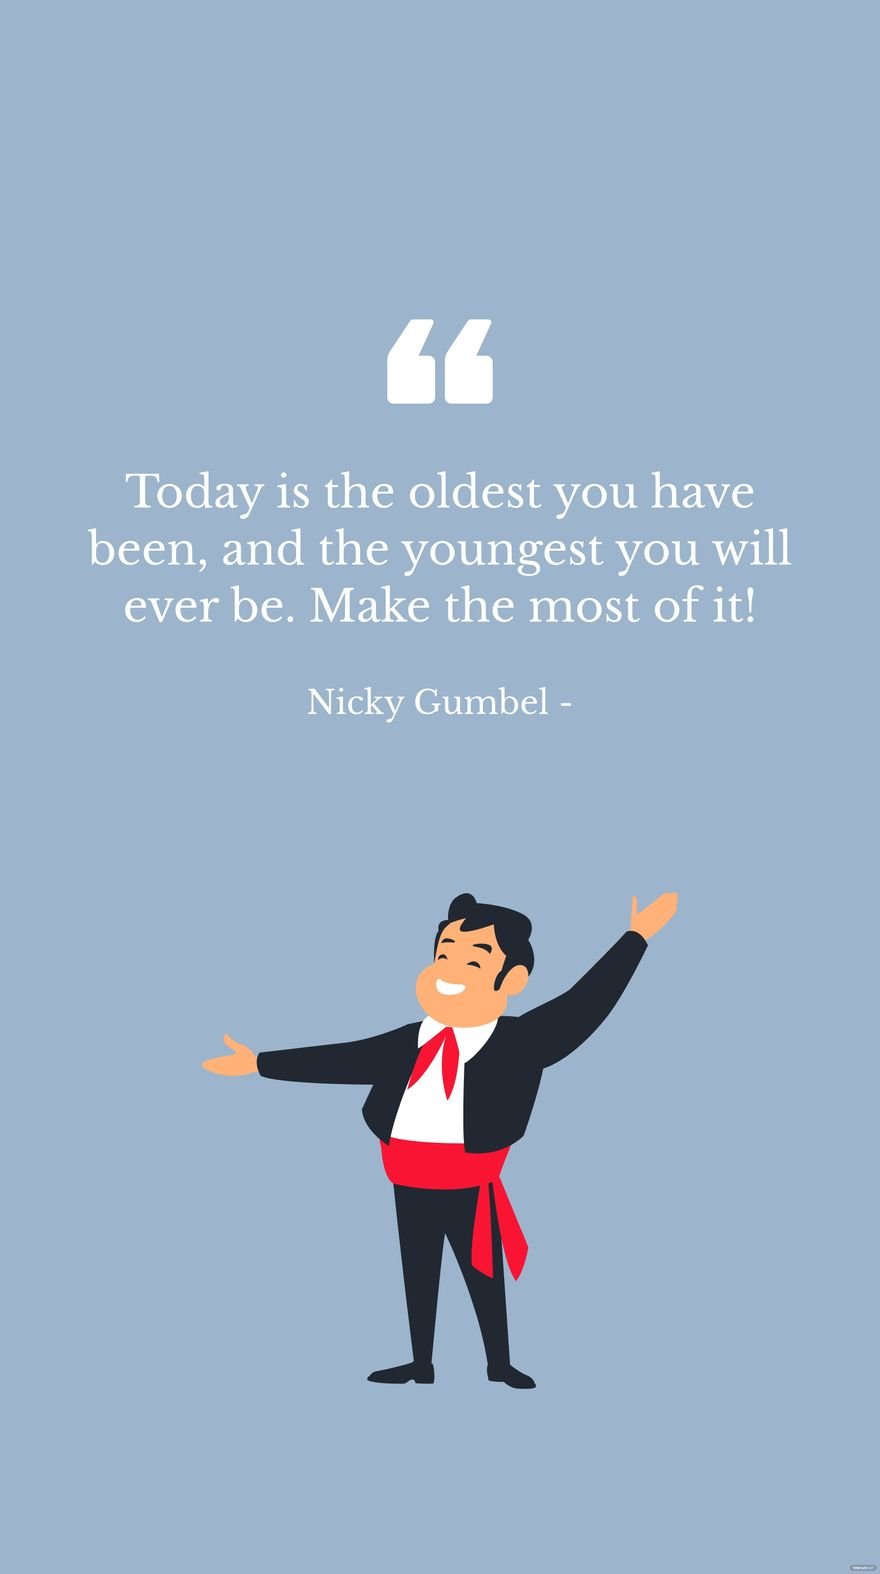 Nicky Gumbel - Today is the oldest you have been, and the youngest you will ever be. Make the most of it!